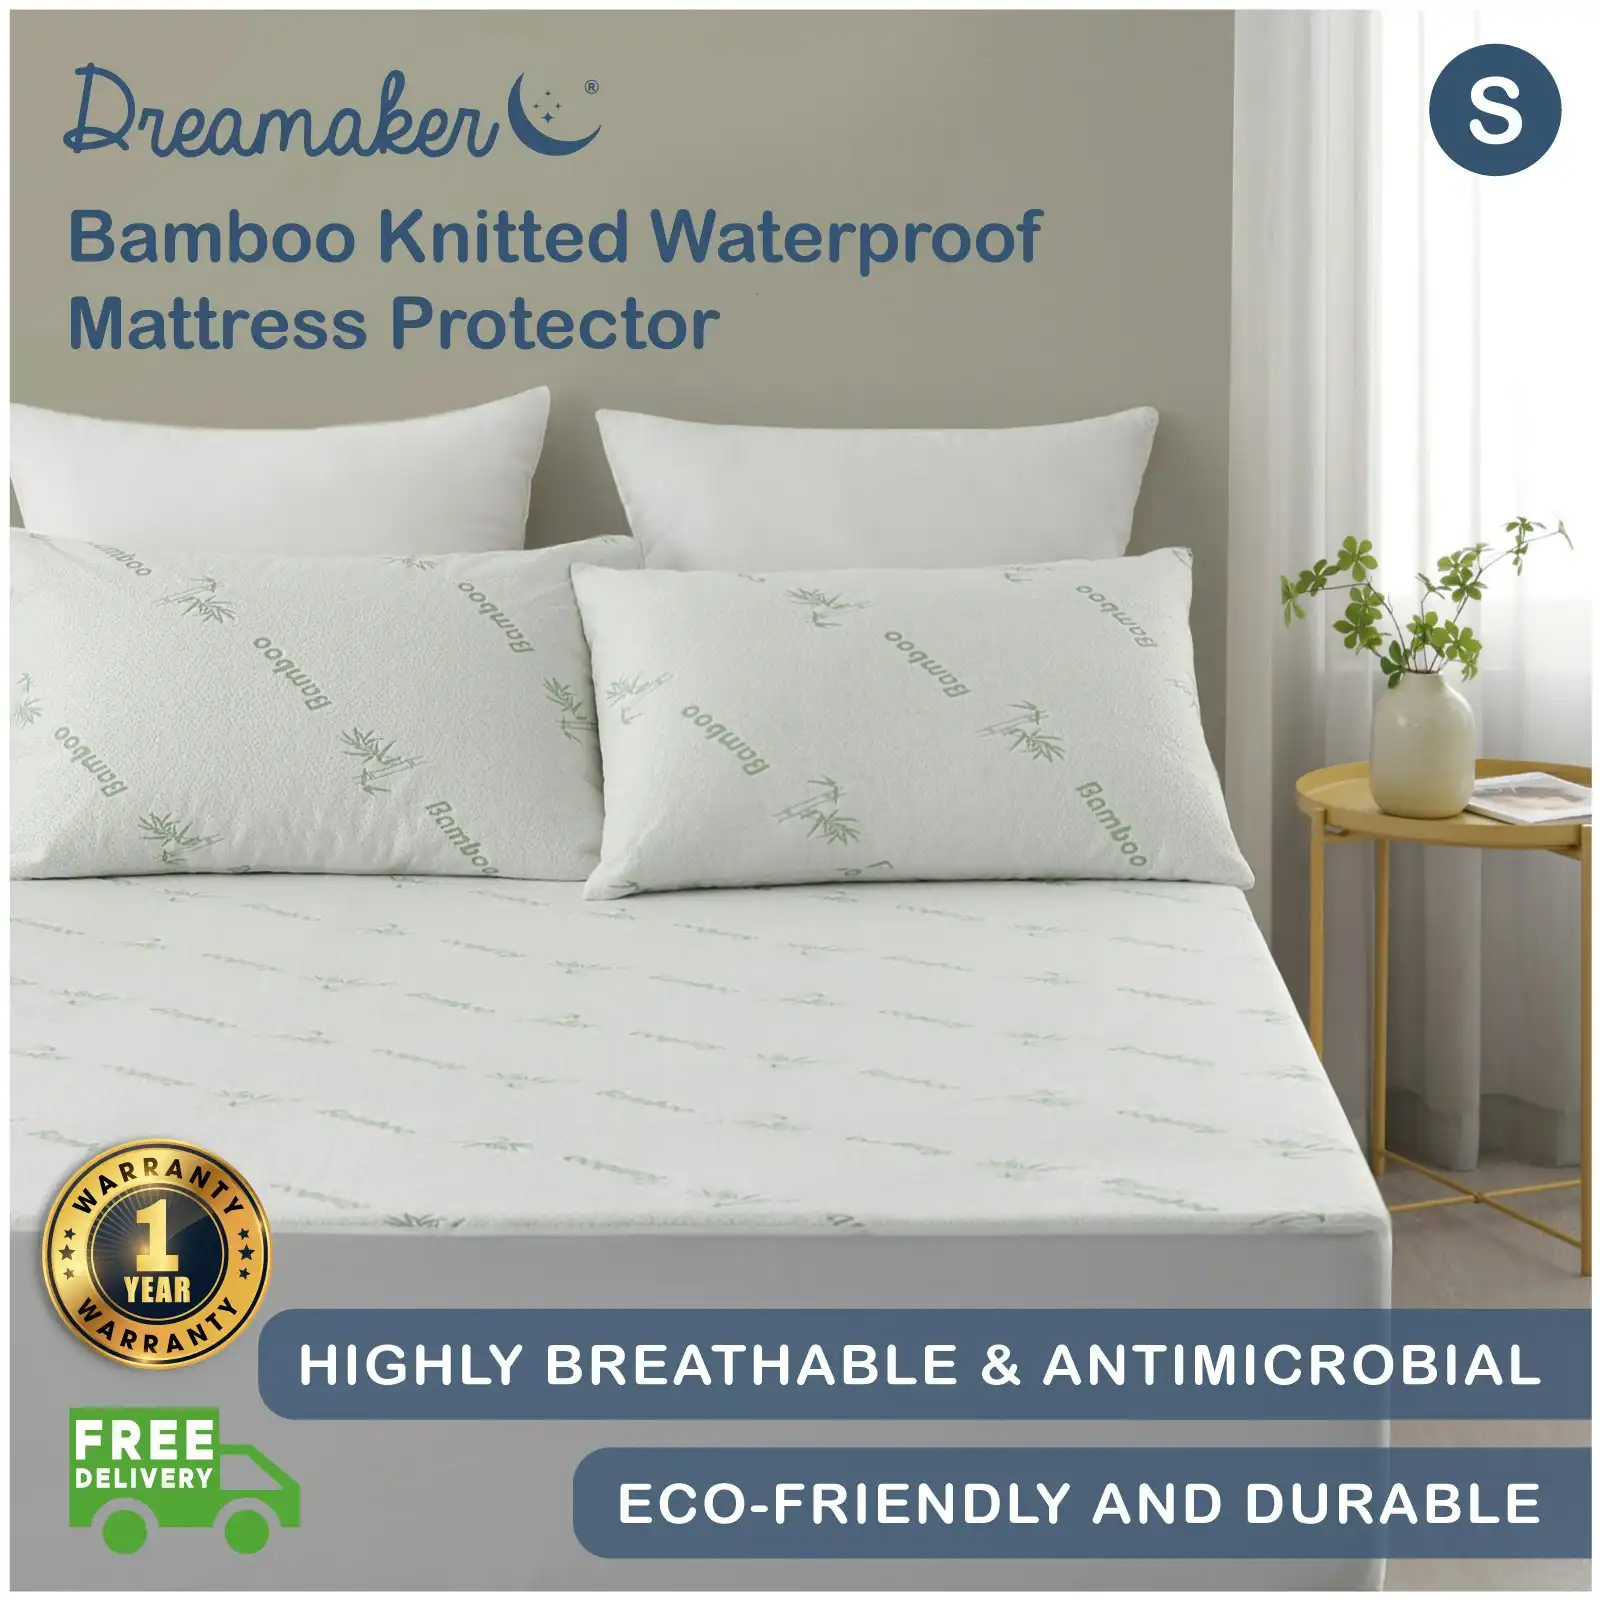 9009442 Dreamaker Bamboo Knitted Waterproof Mattress Protector - Single Bed